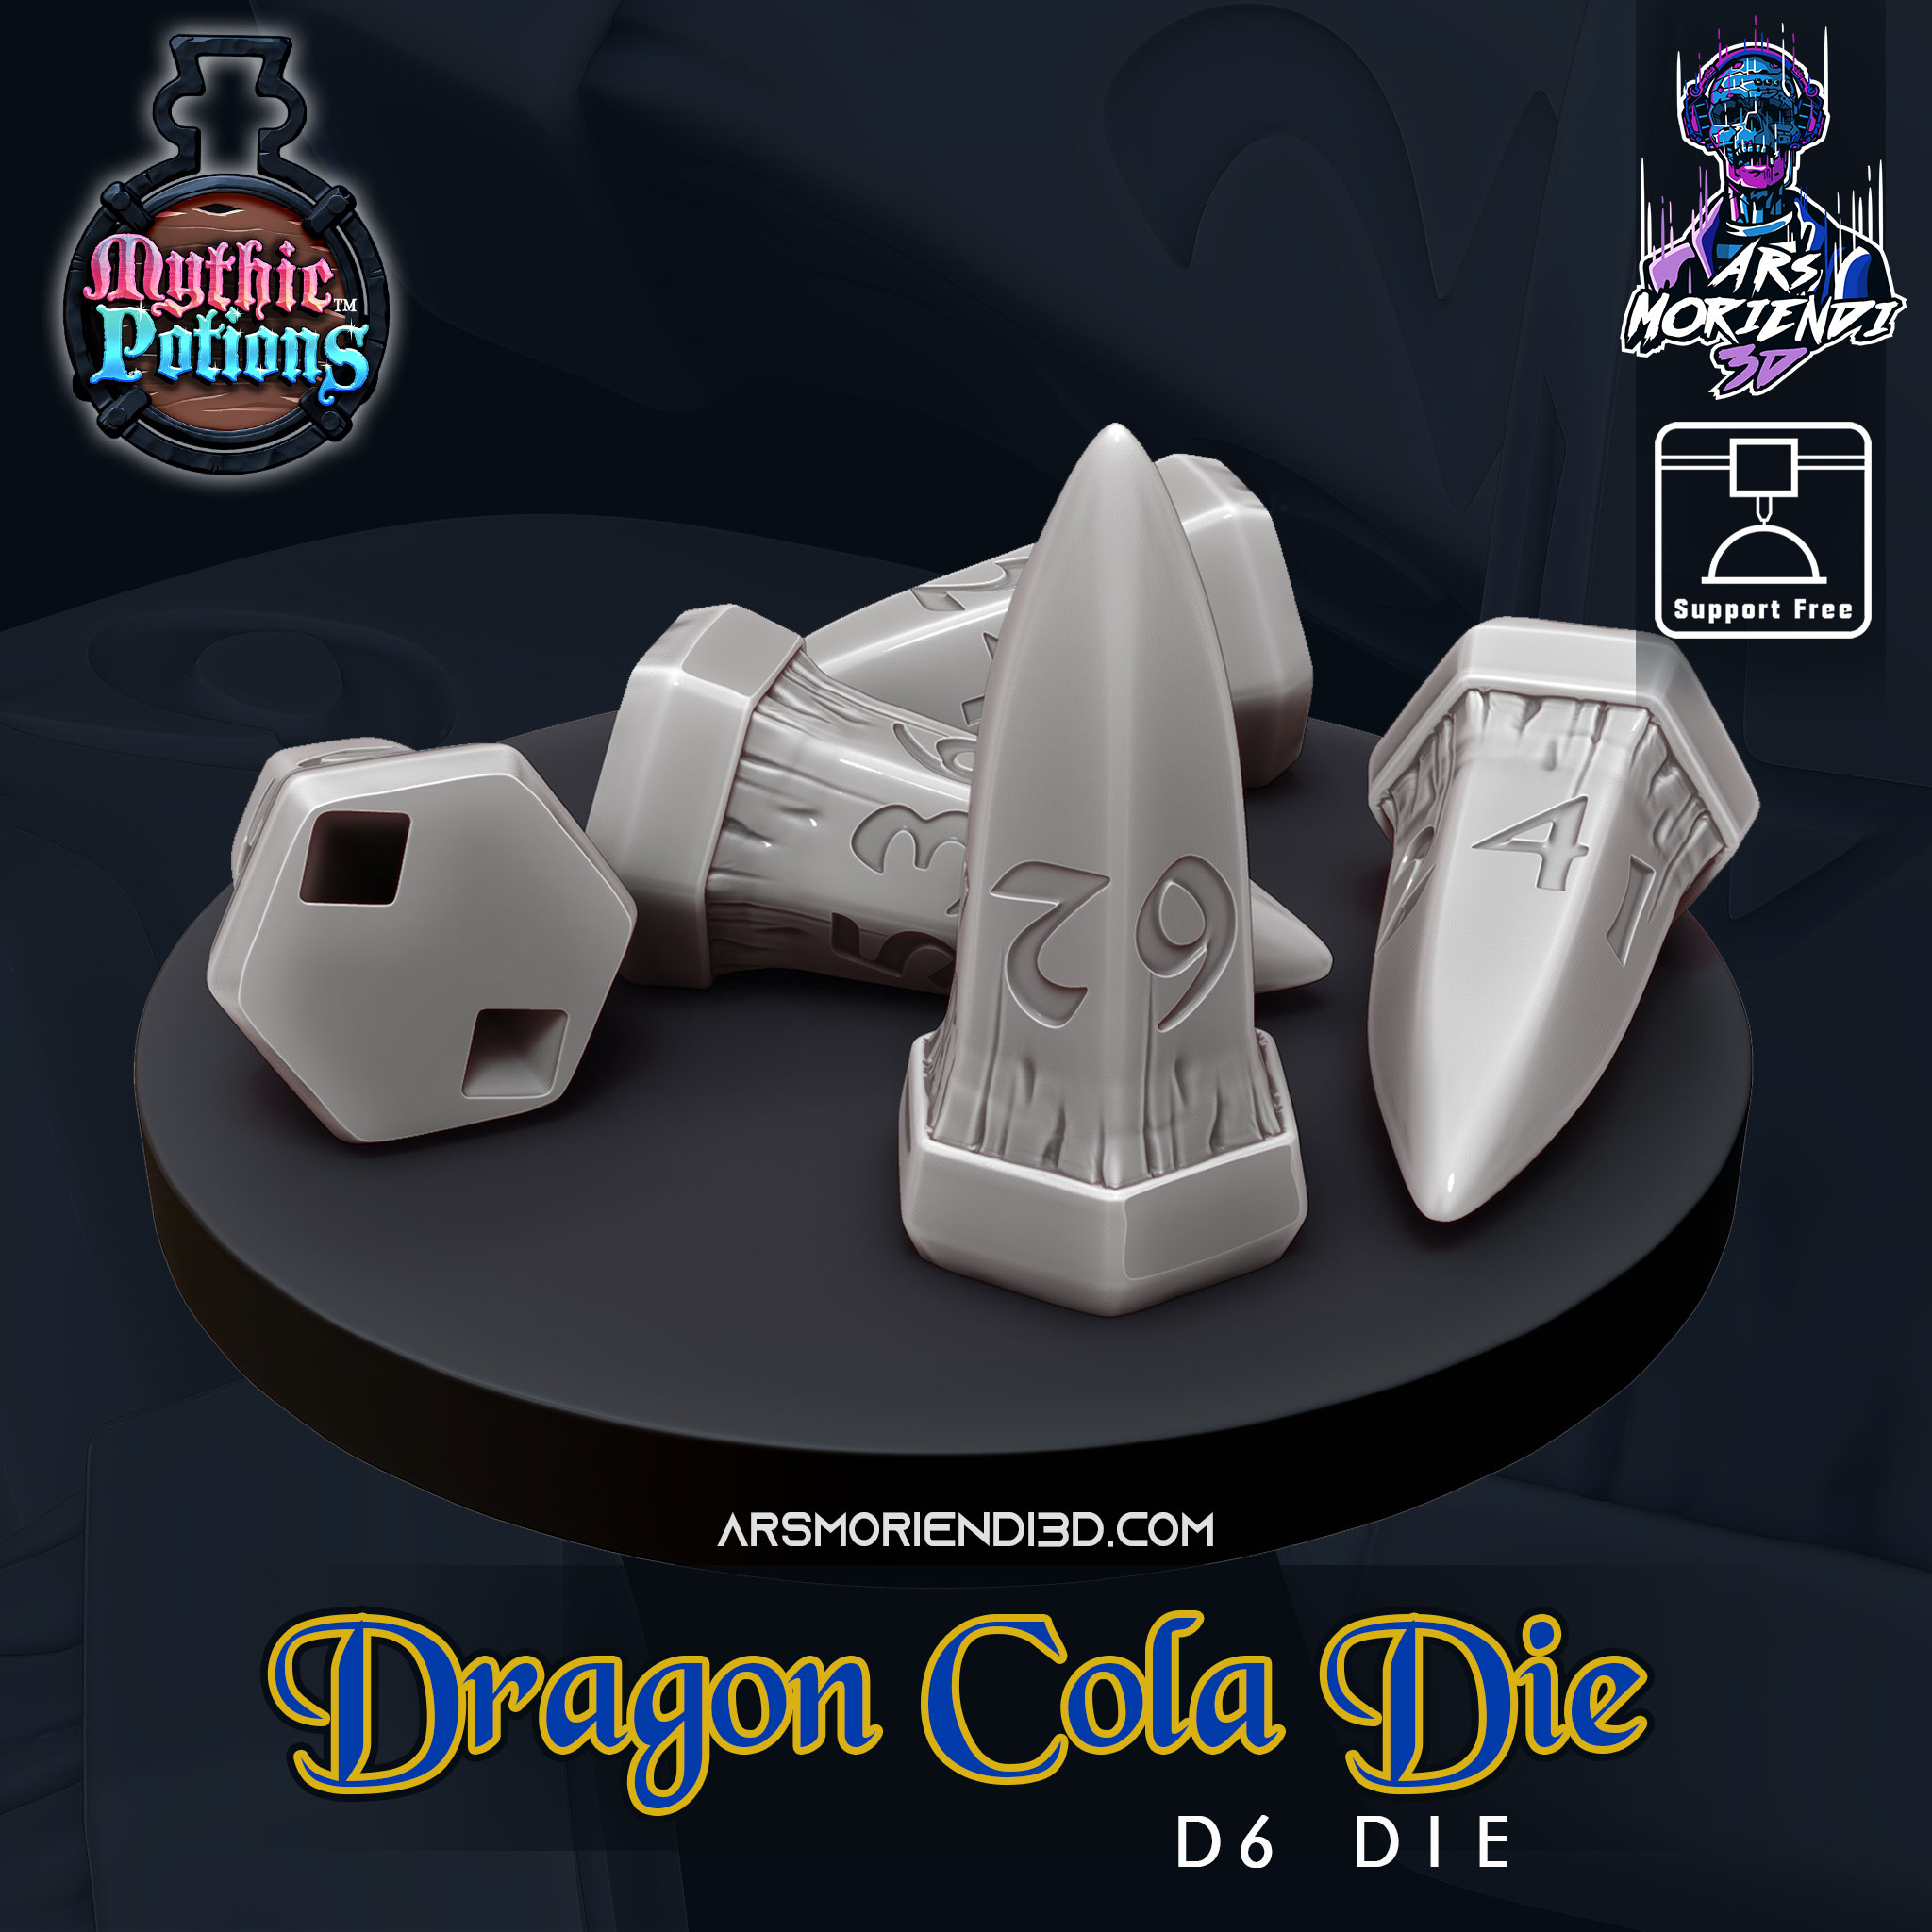 Dragon Cola Die D6 - Mythic Potions